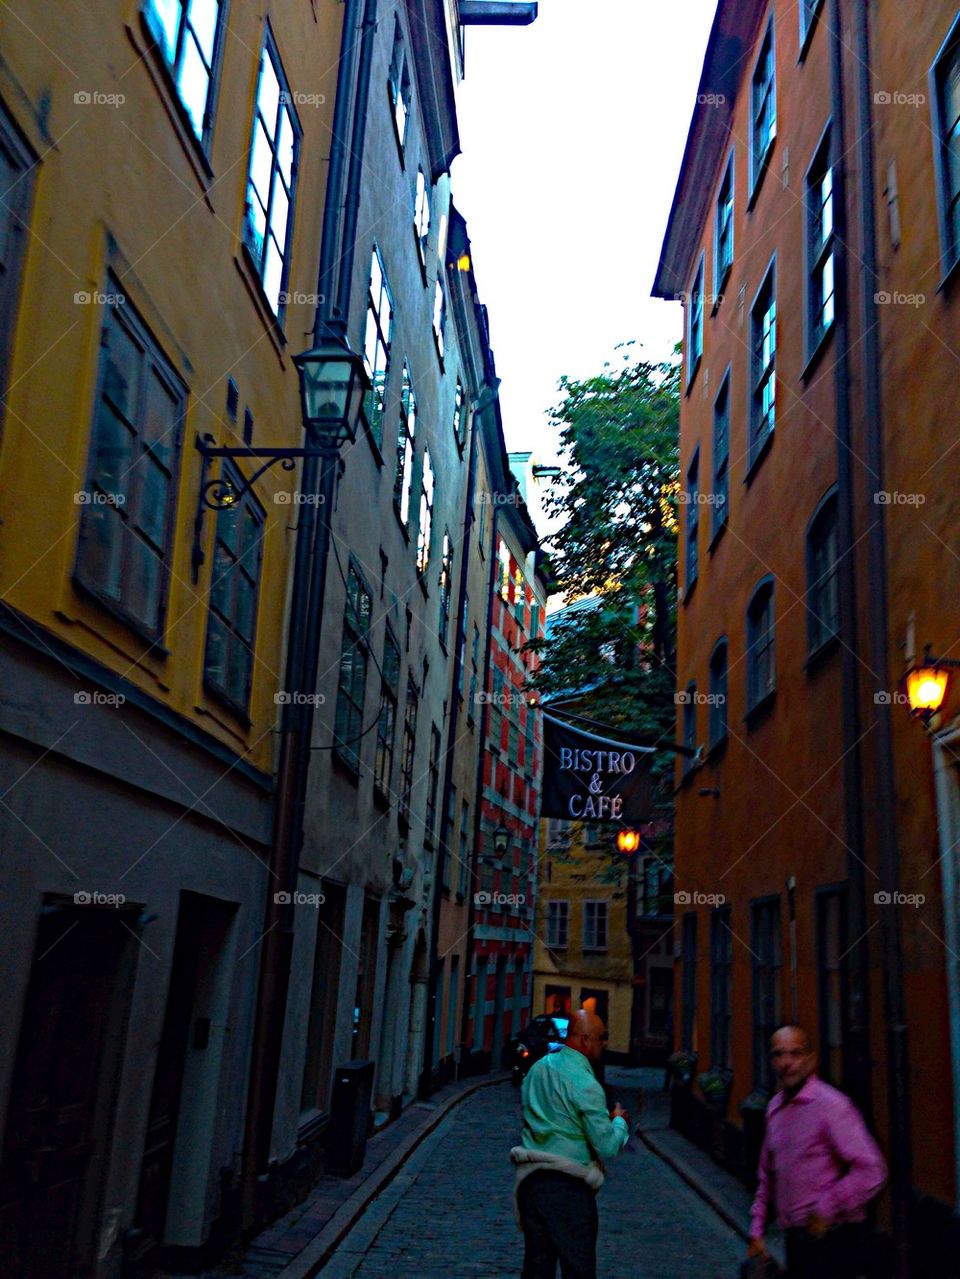 Out in the alley in Stockholm